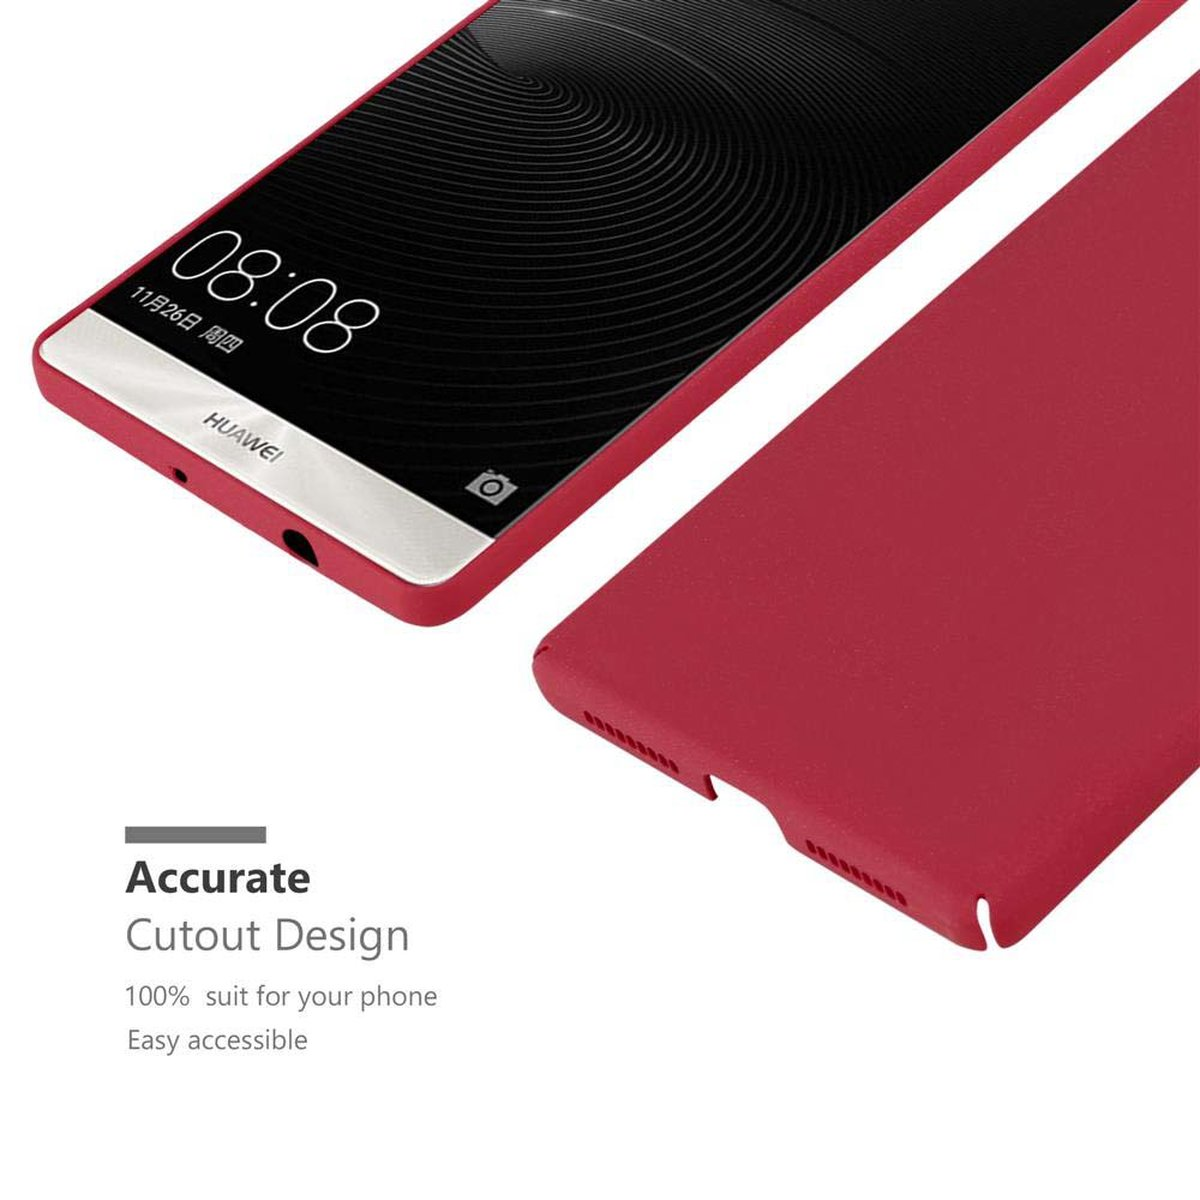 Frosty CADORABO ROT 8, FROSTY im Huawei, Hülle Style, MATE Case Hard Backcover,